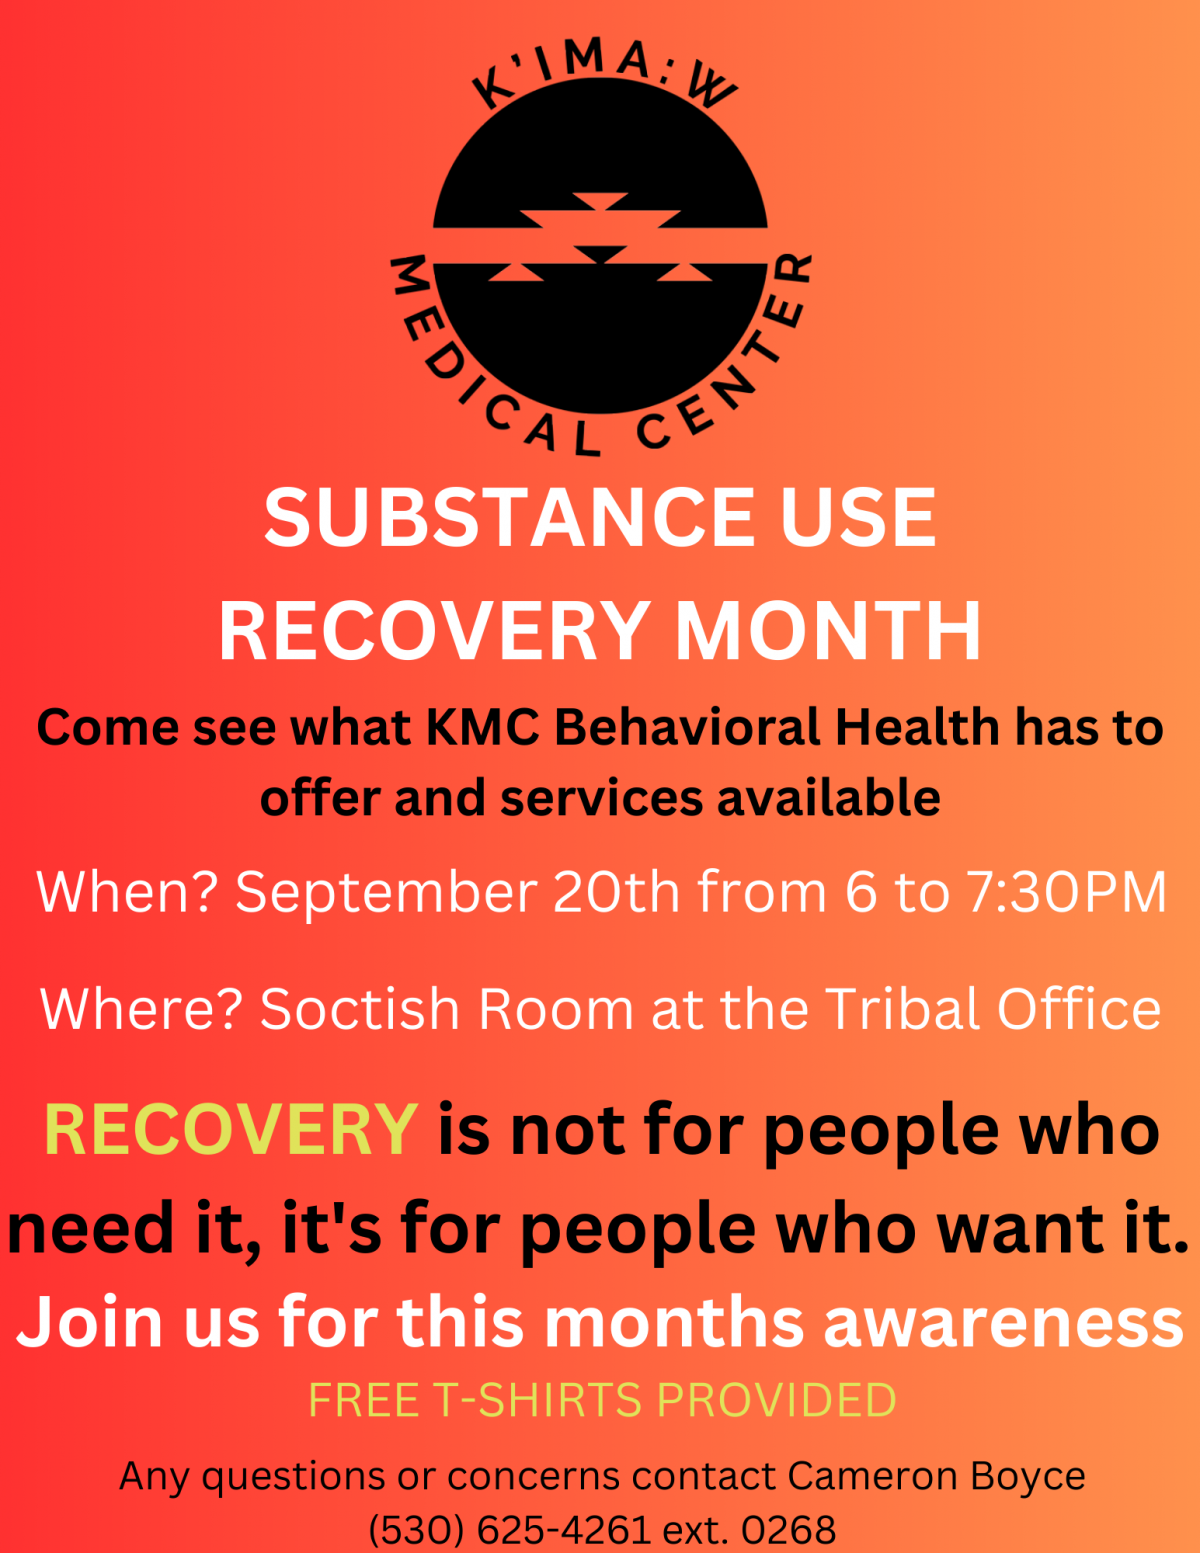 Substance use recovery month